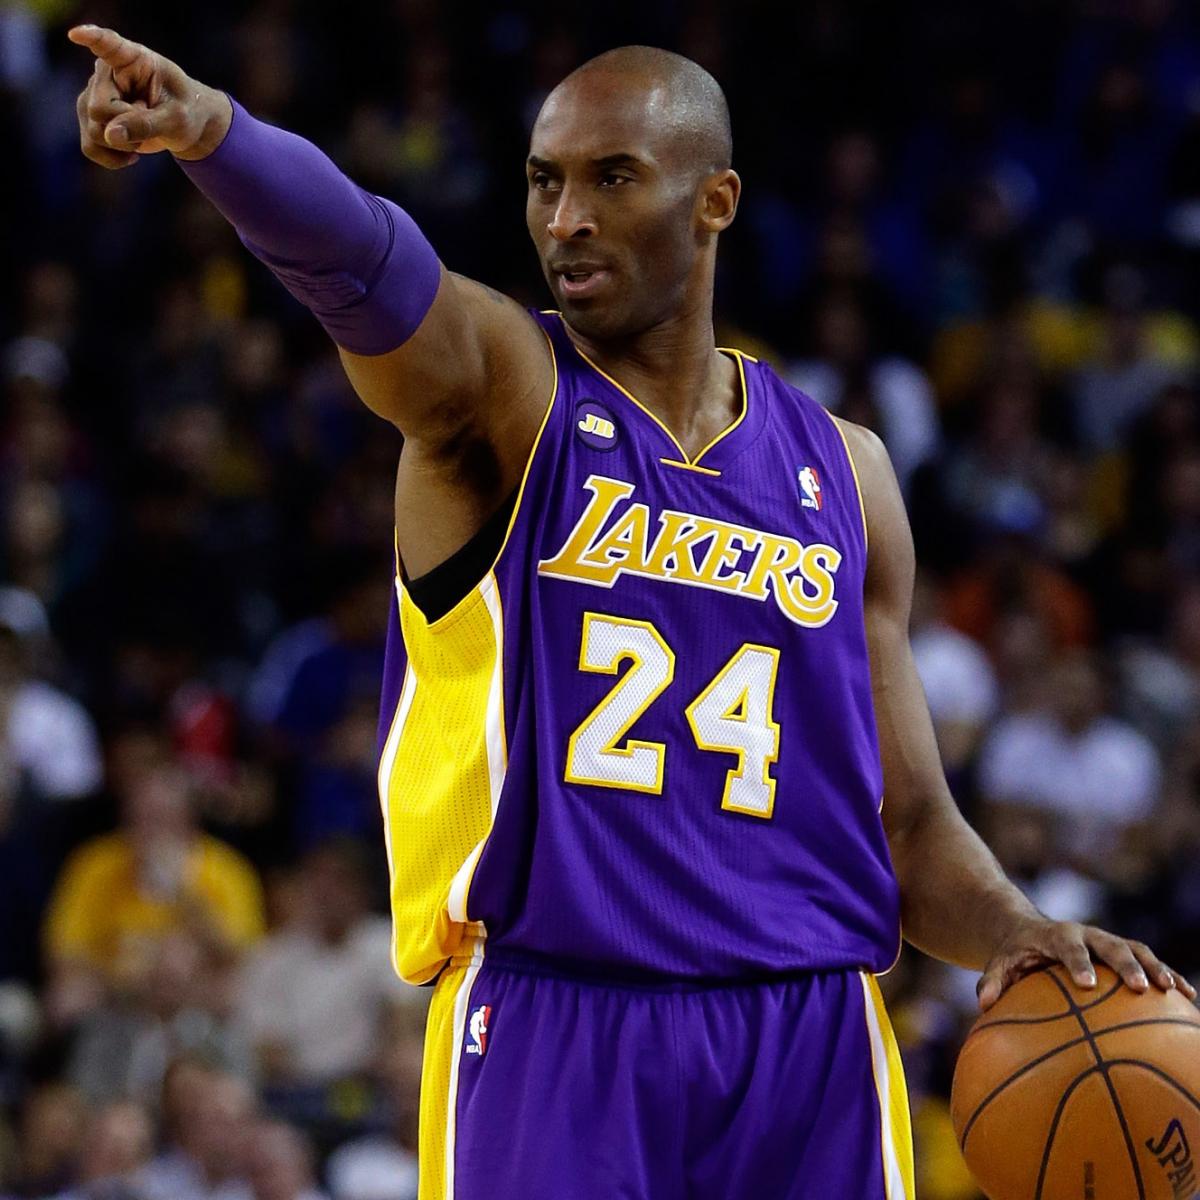 Lakers News: Latest on Kobe Bryant's Recovery, LA's 2013-14 Schedule and More